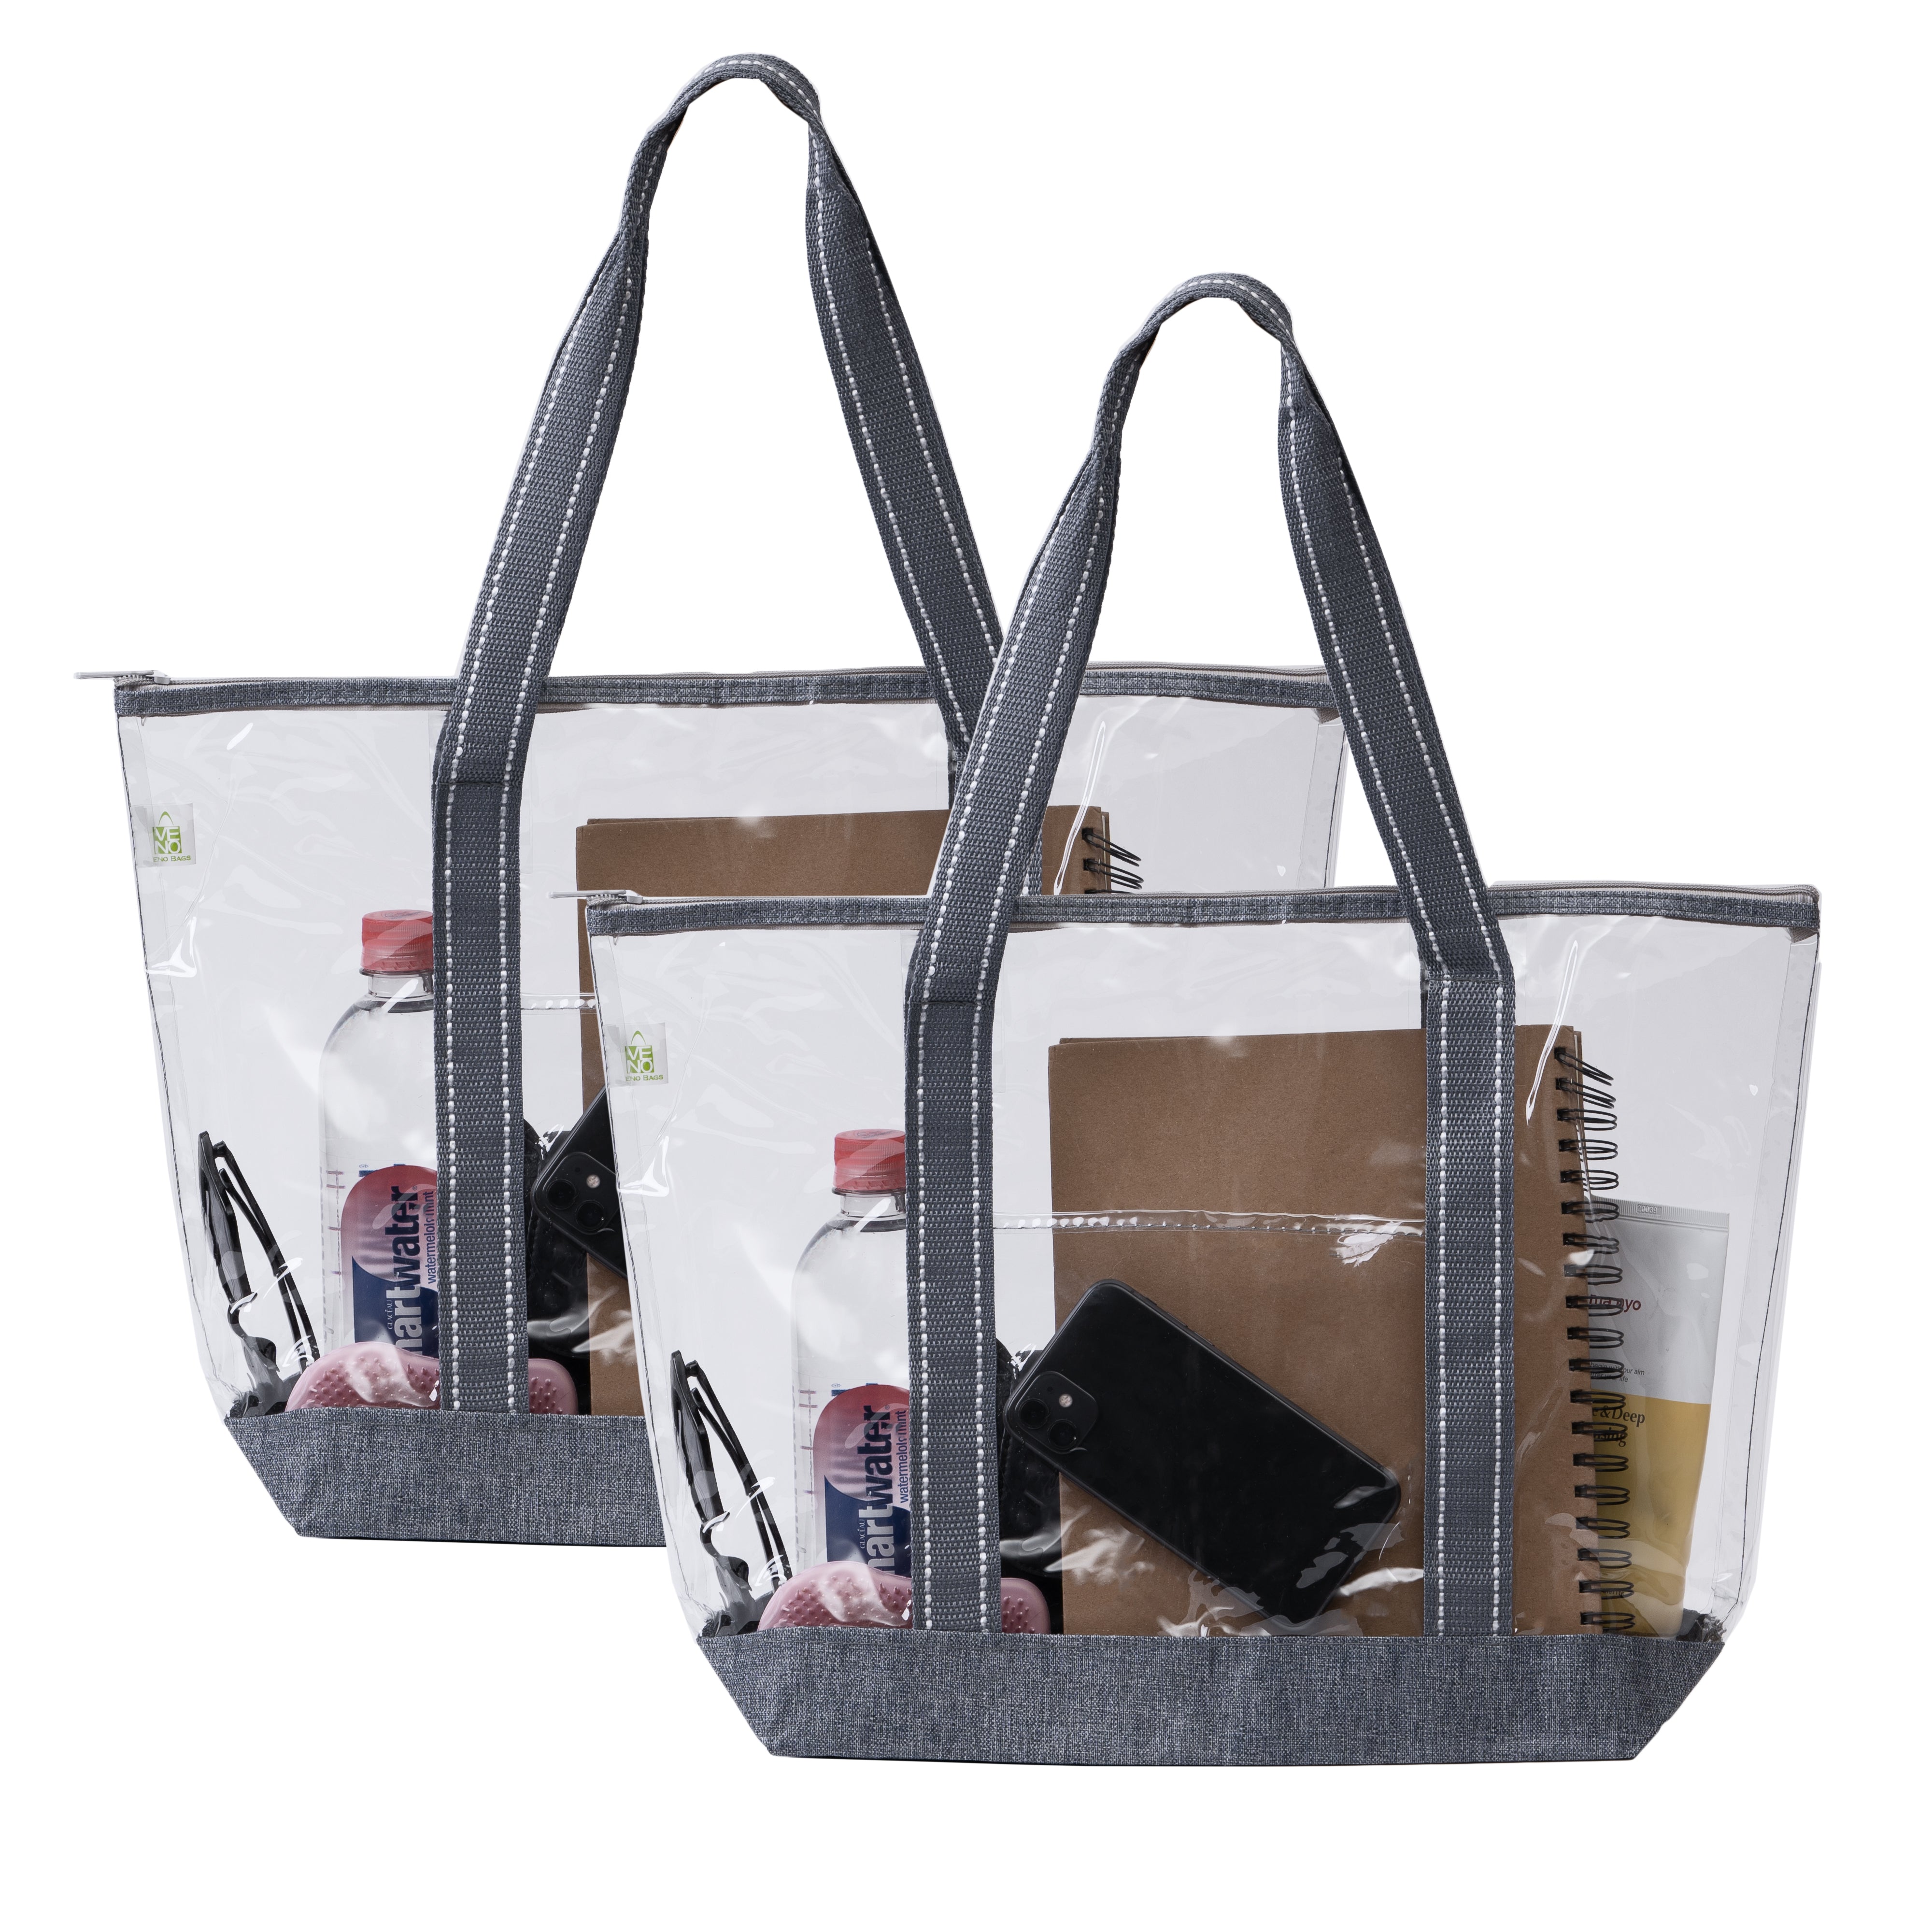 Black Heart PVC Large Tote Bag Clear Totes with Inner Pouch